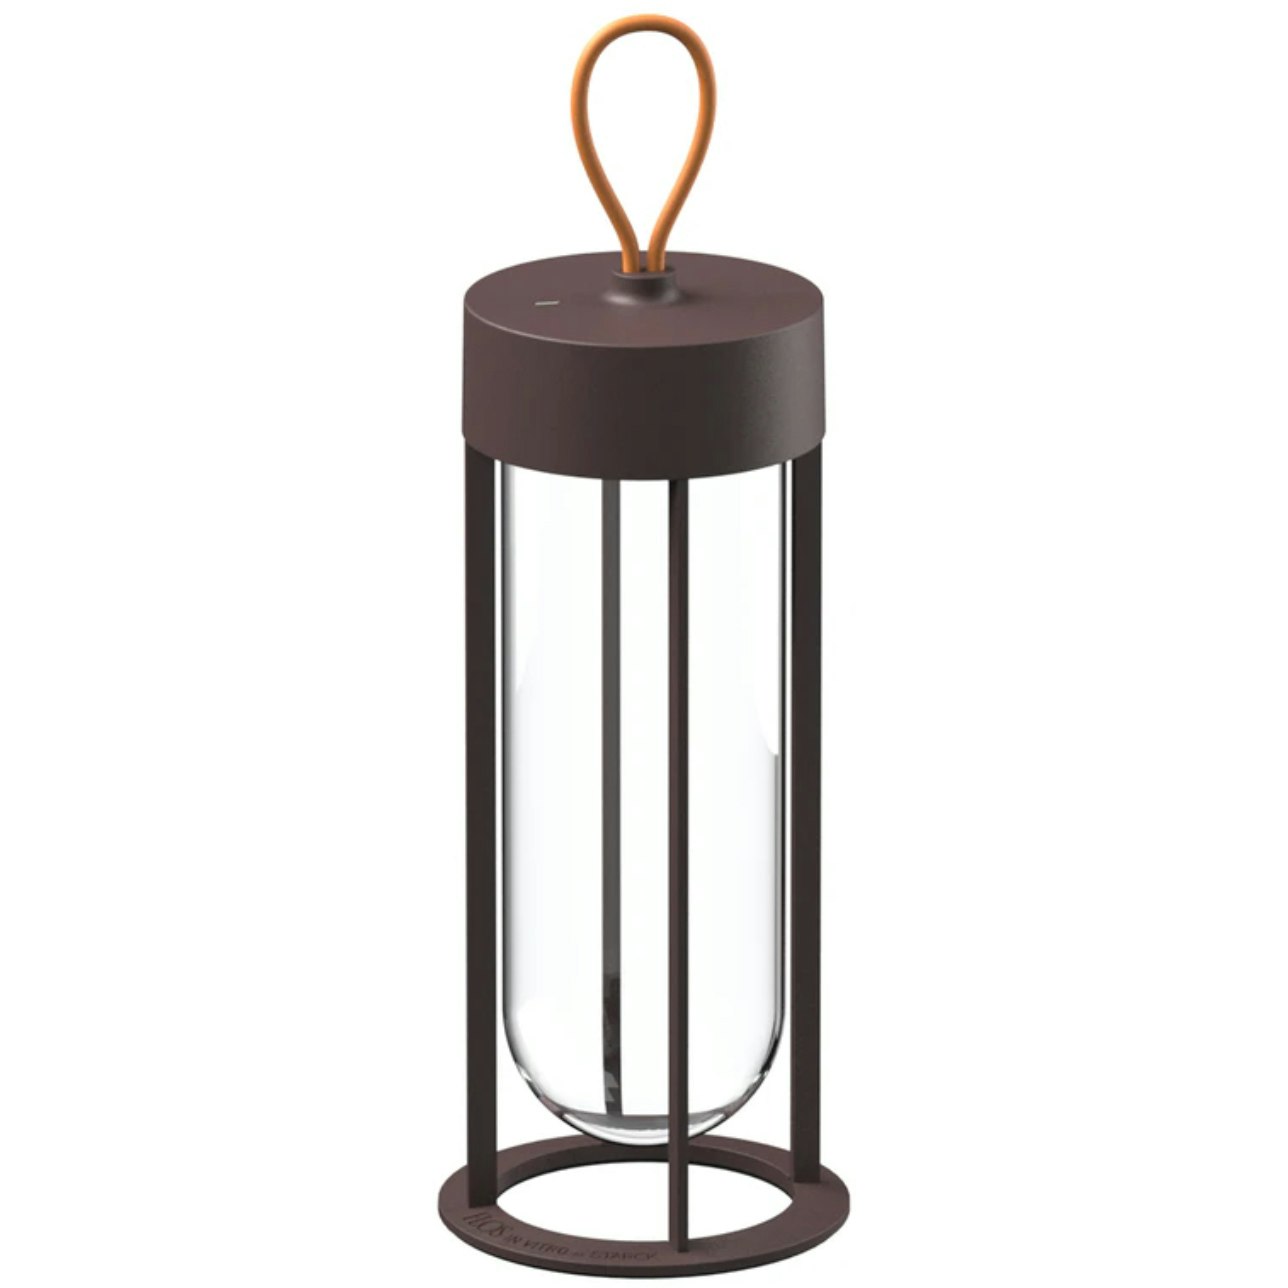 In Vitro Unplugged Table Lamp, Deep Brown